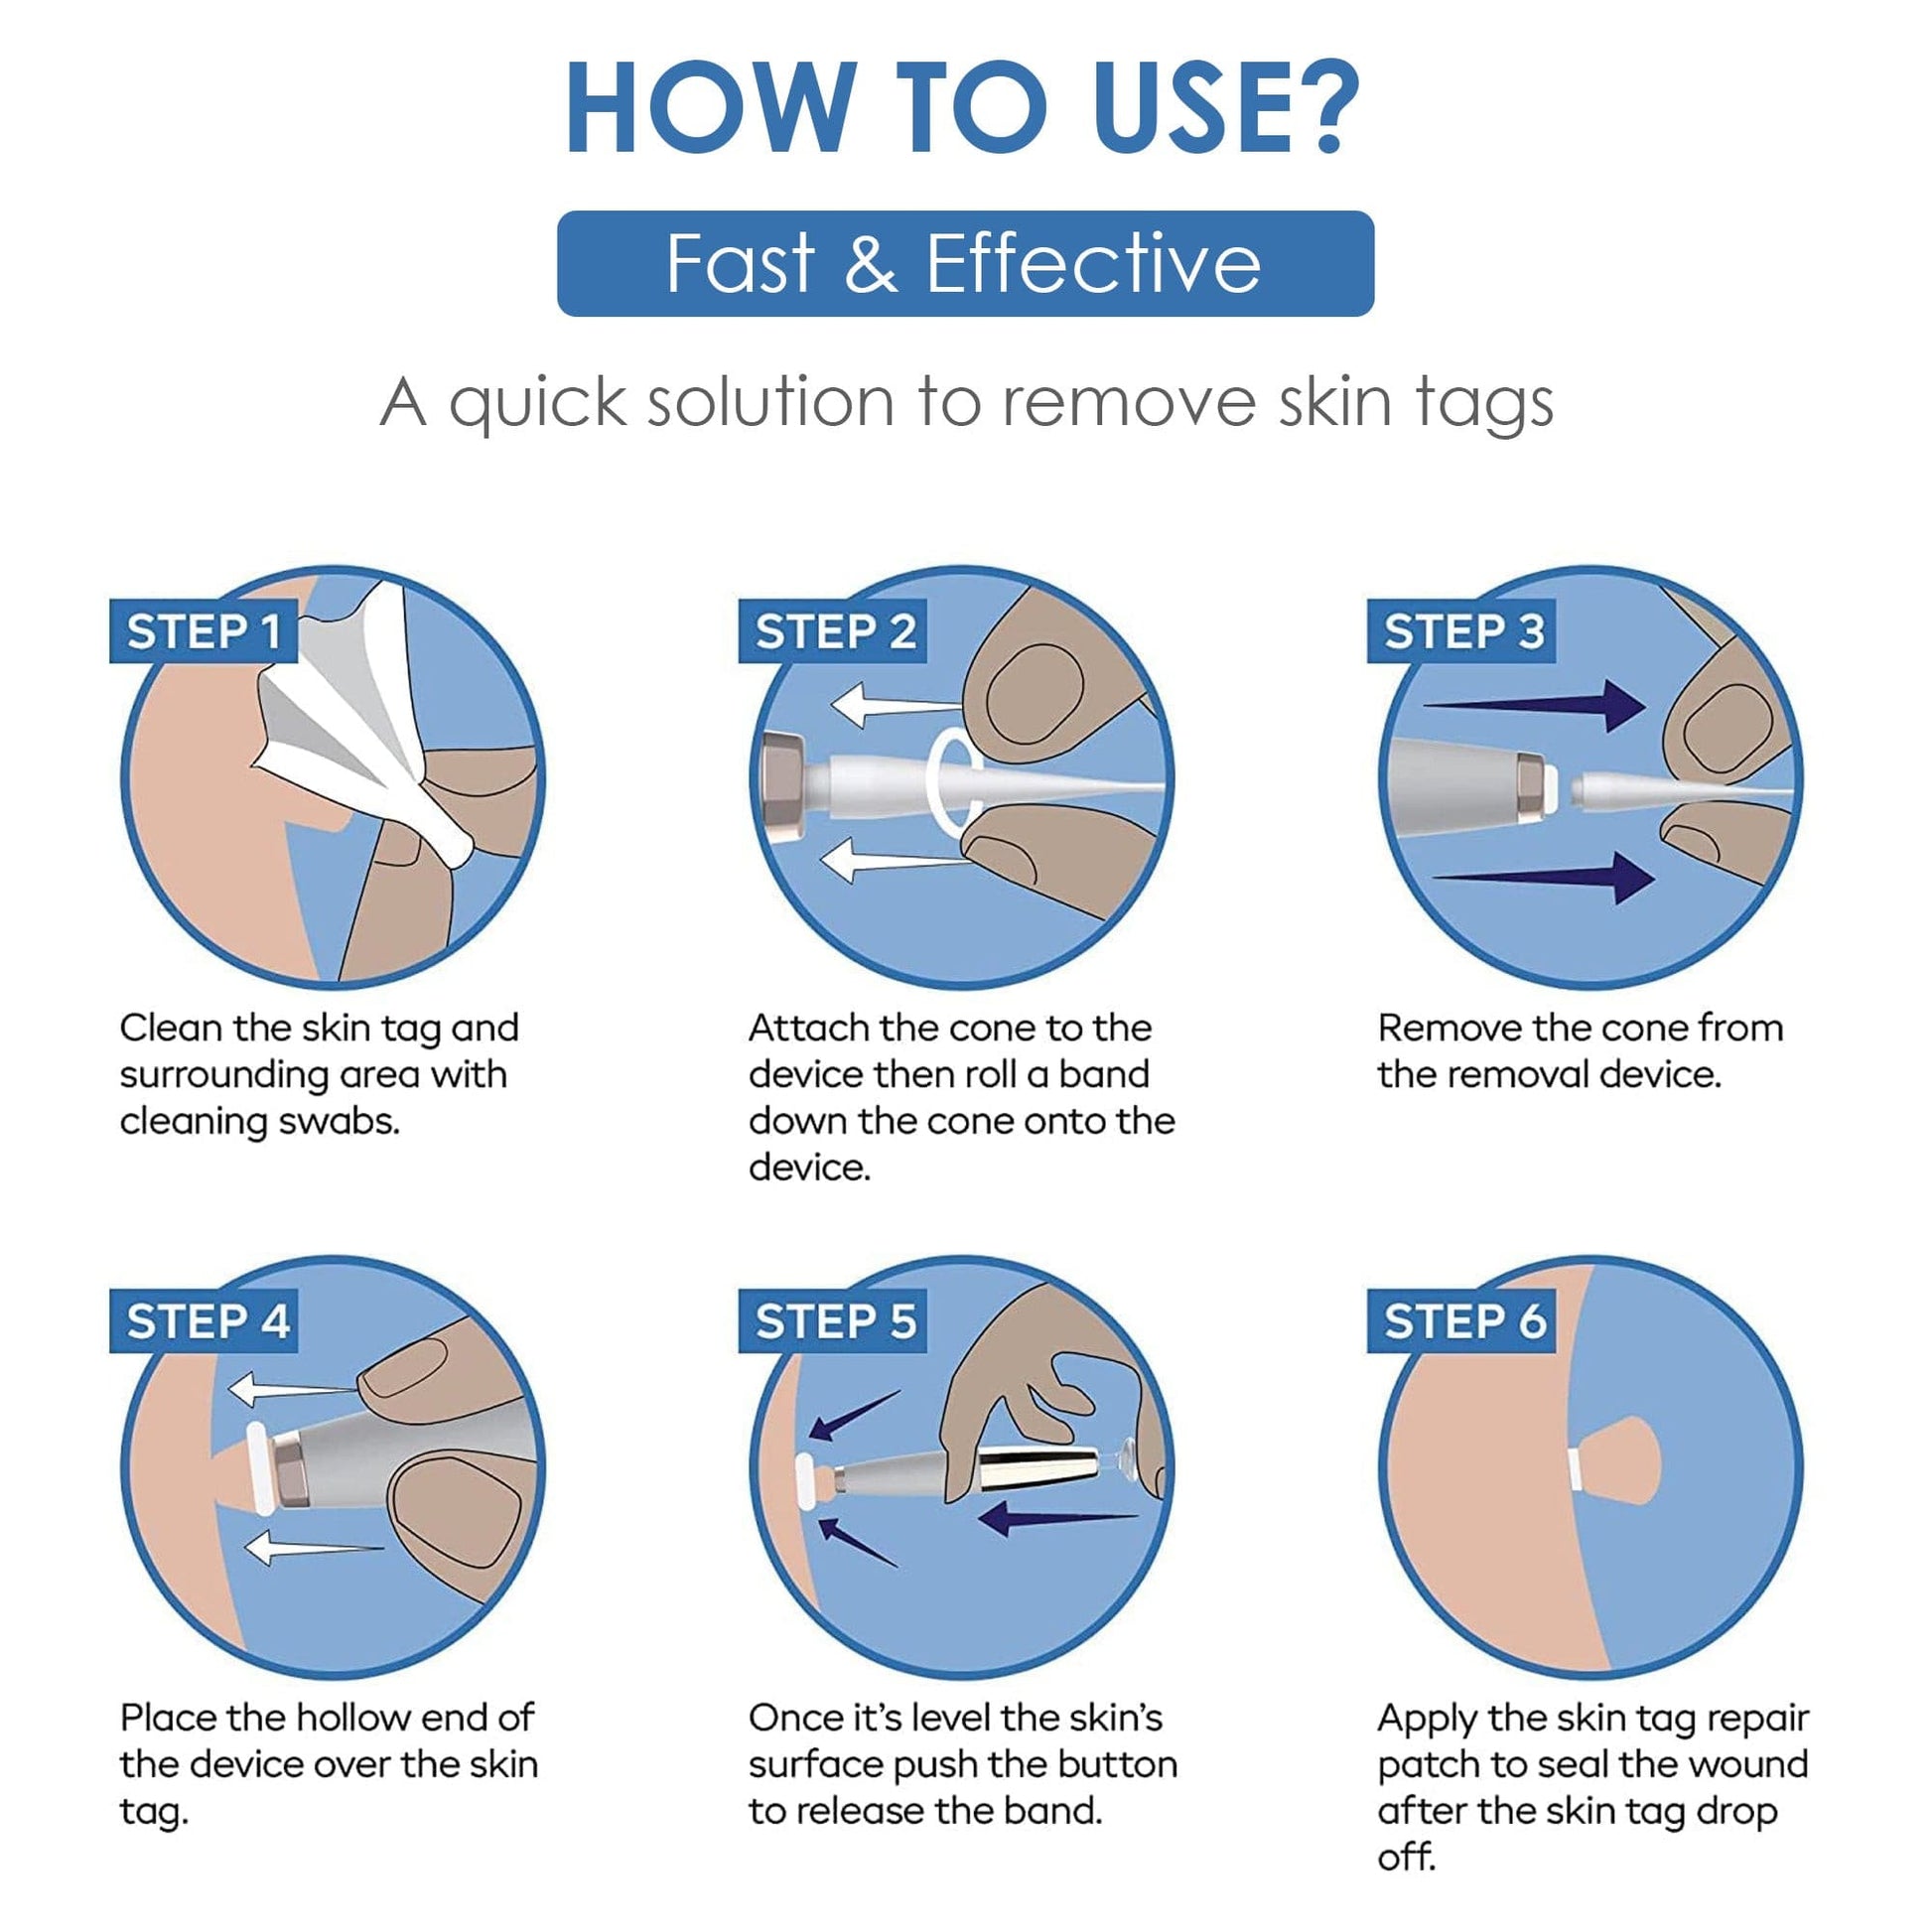  Healer Labs London - Tag Bandit Auto Skin Tag Removal Kit - The Beauty Corp.